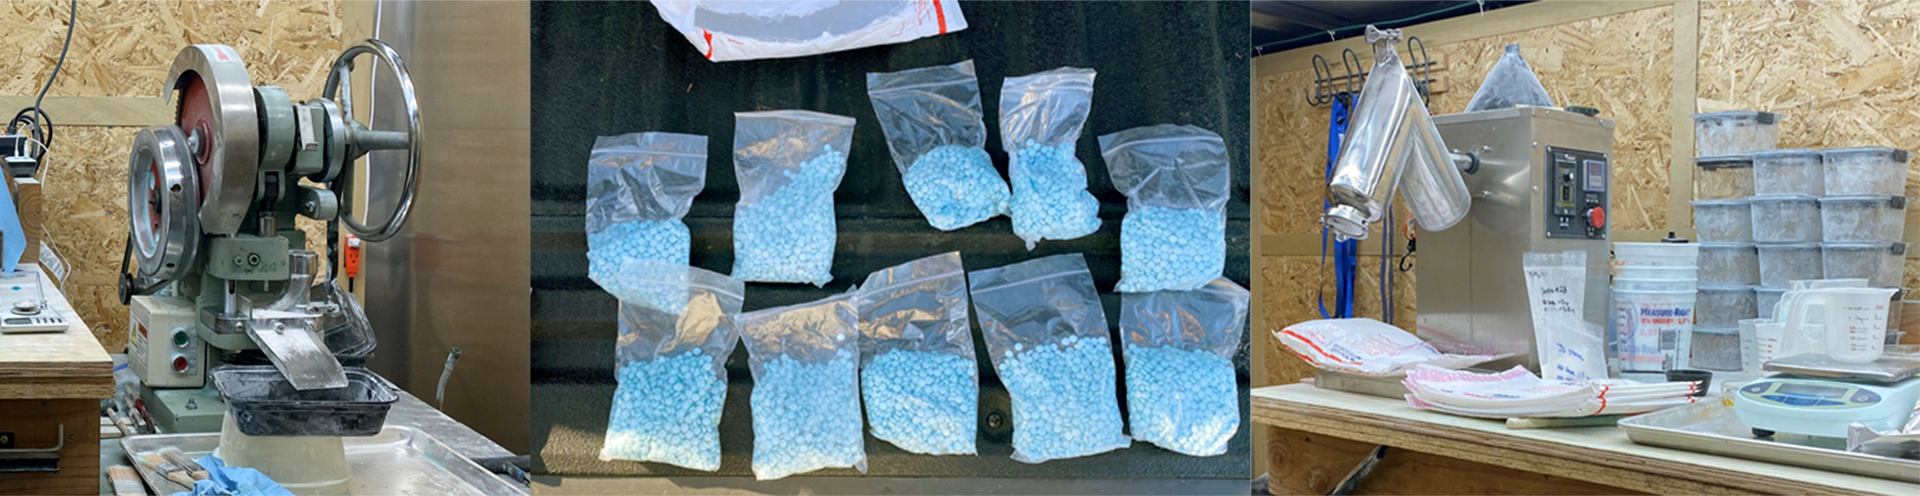 These provided photos show a makeshift fentanyl laboratory inside a storage unit in Vancouver, Wash., Oct. 13, 2022. The lab was part of a drug trafficking ring that brought fentanyl from Mexico, pressed it, and sold an average of 10,000 pills a week.